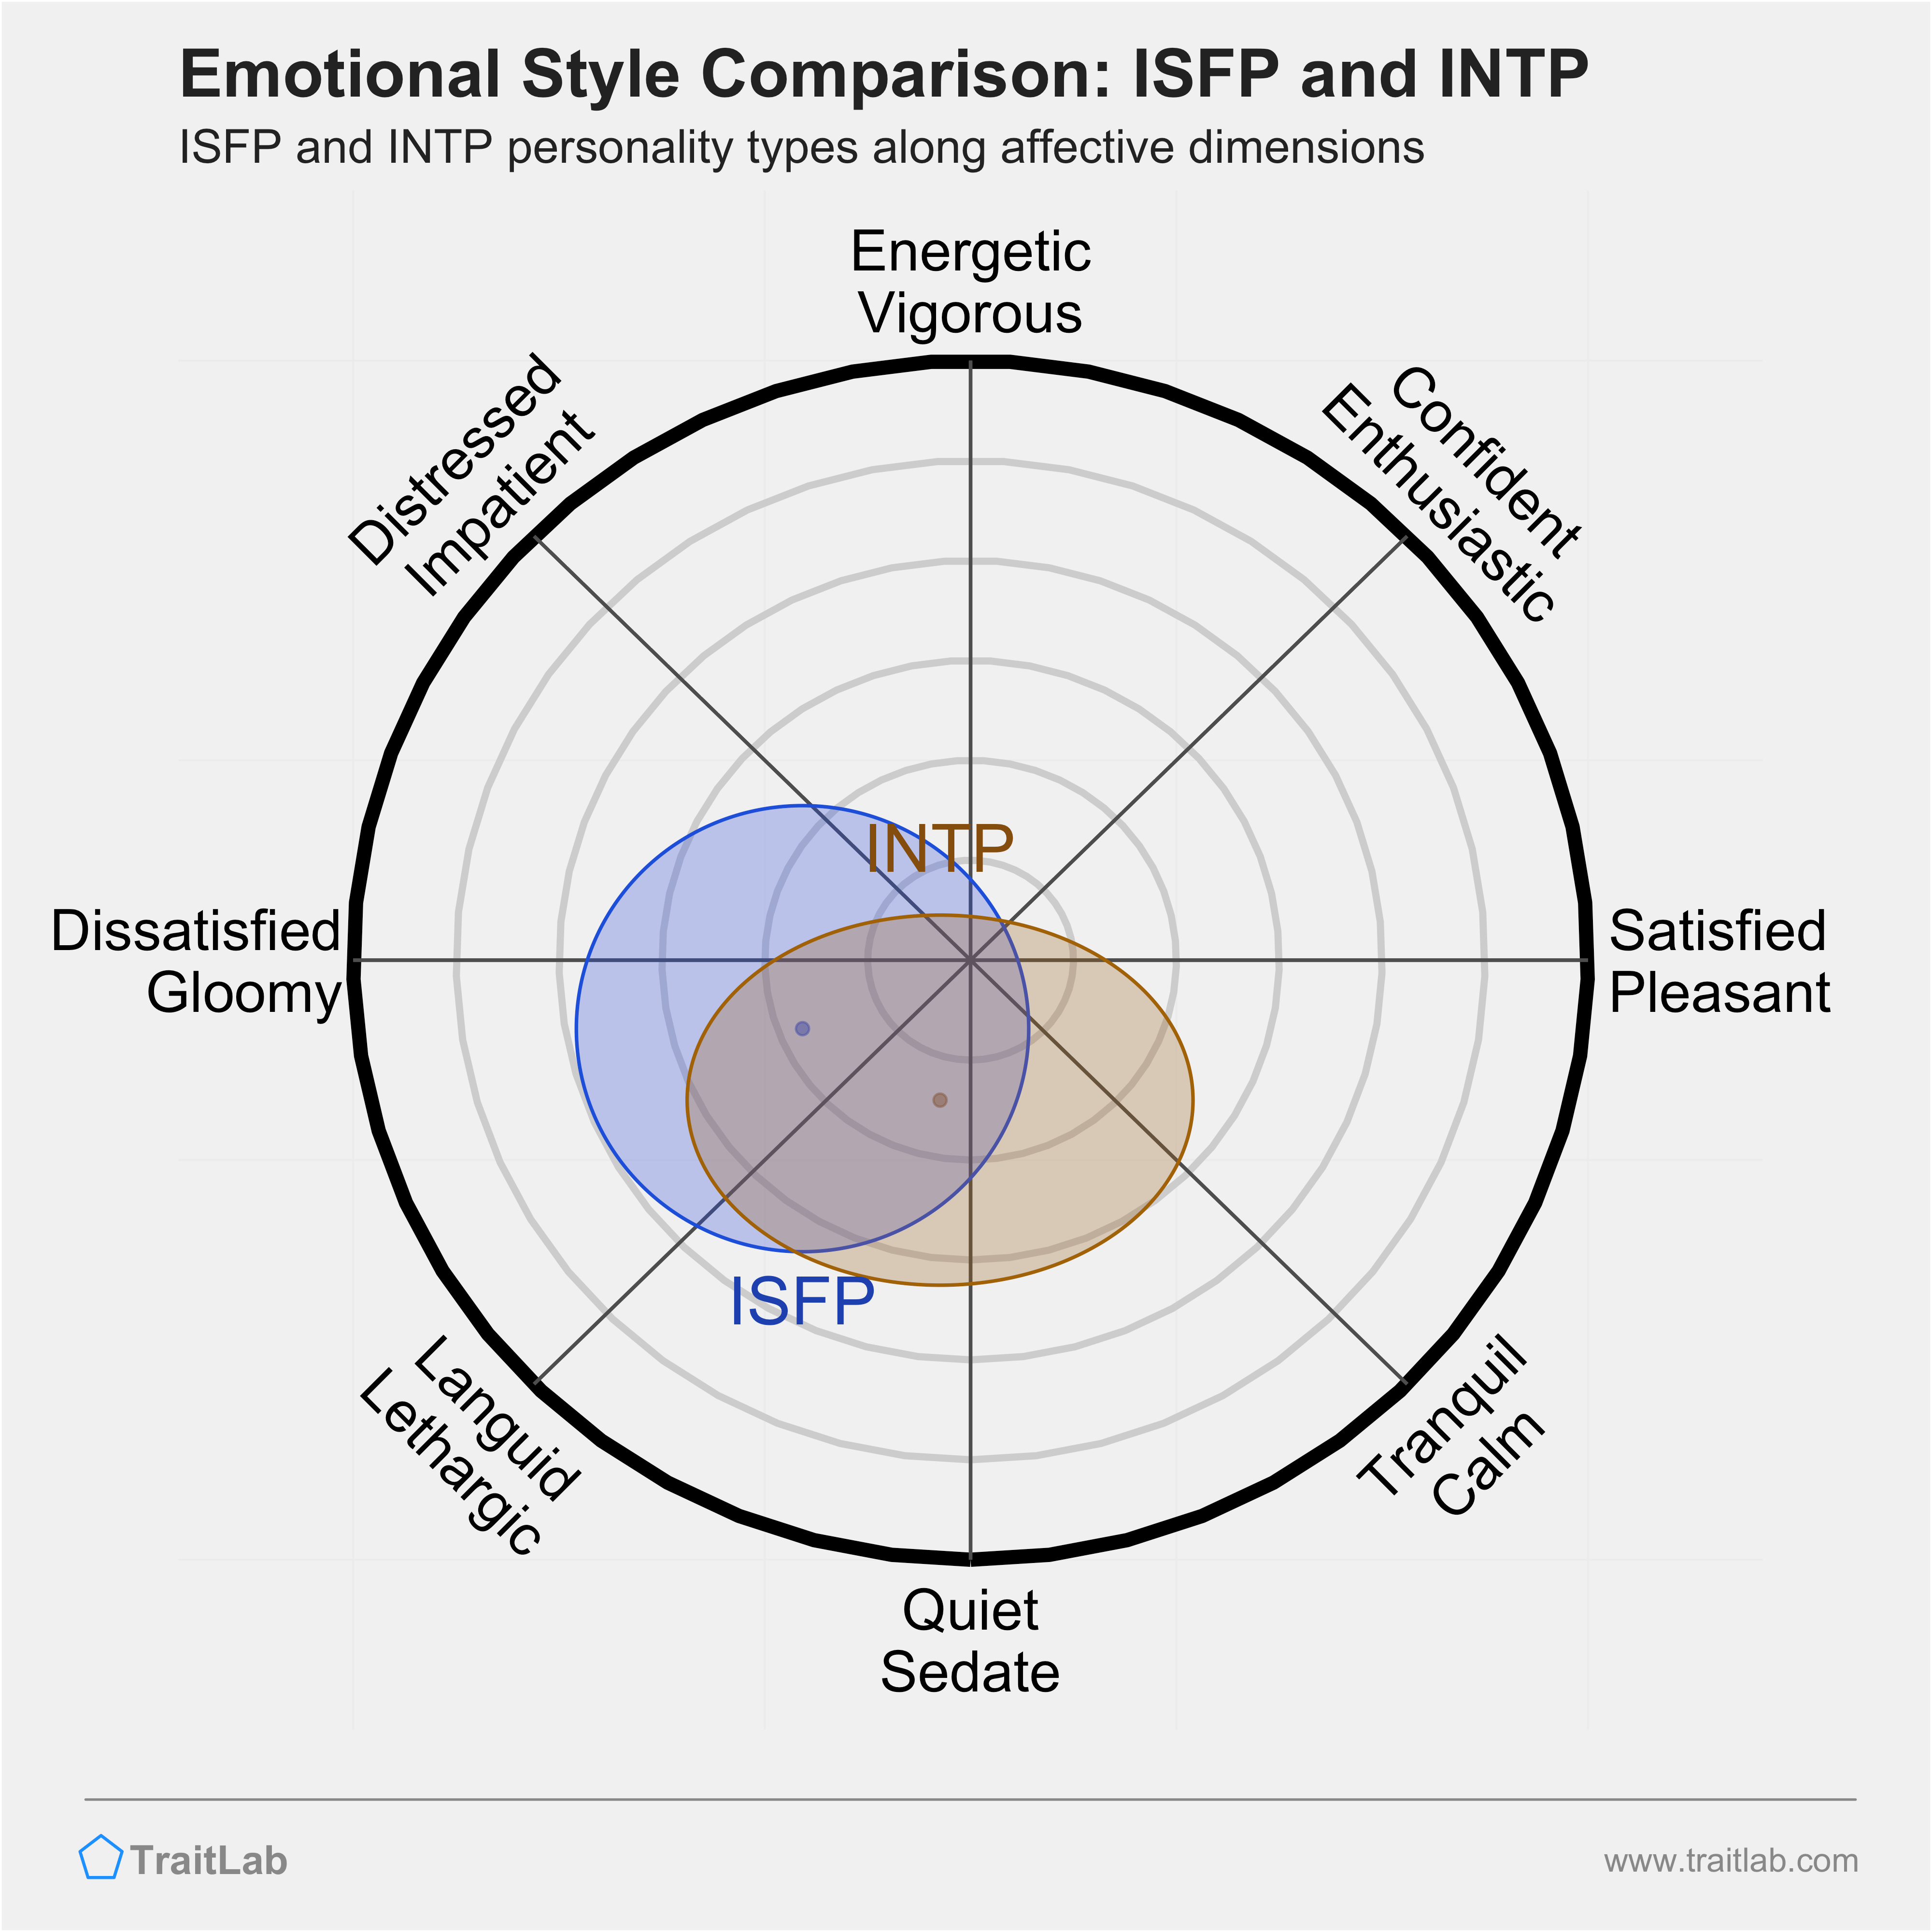 ISFP and INTP comparison across emotional (affective) dimensions